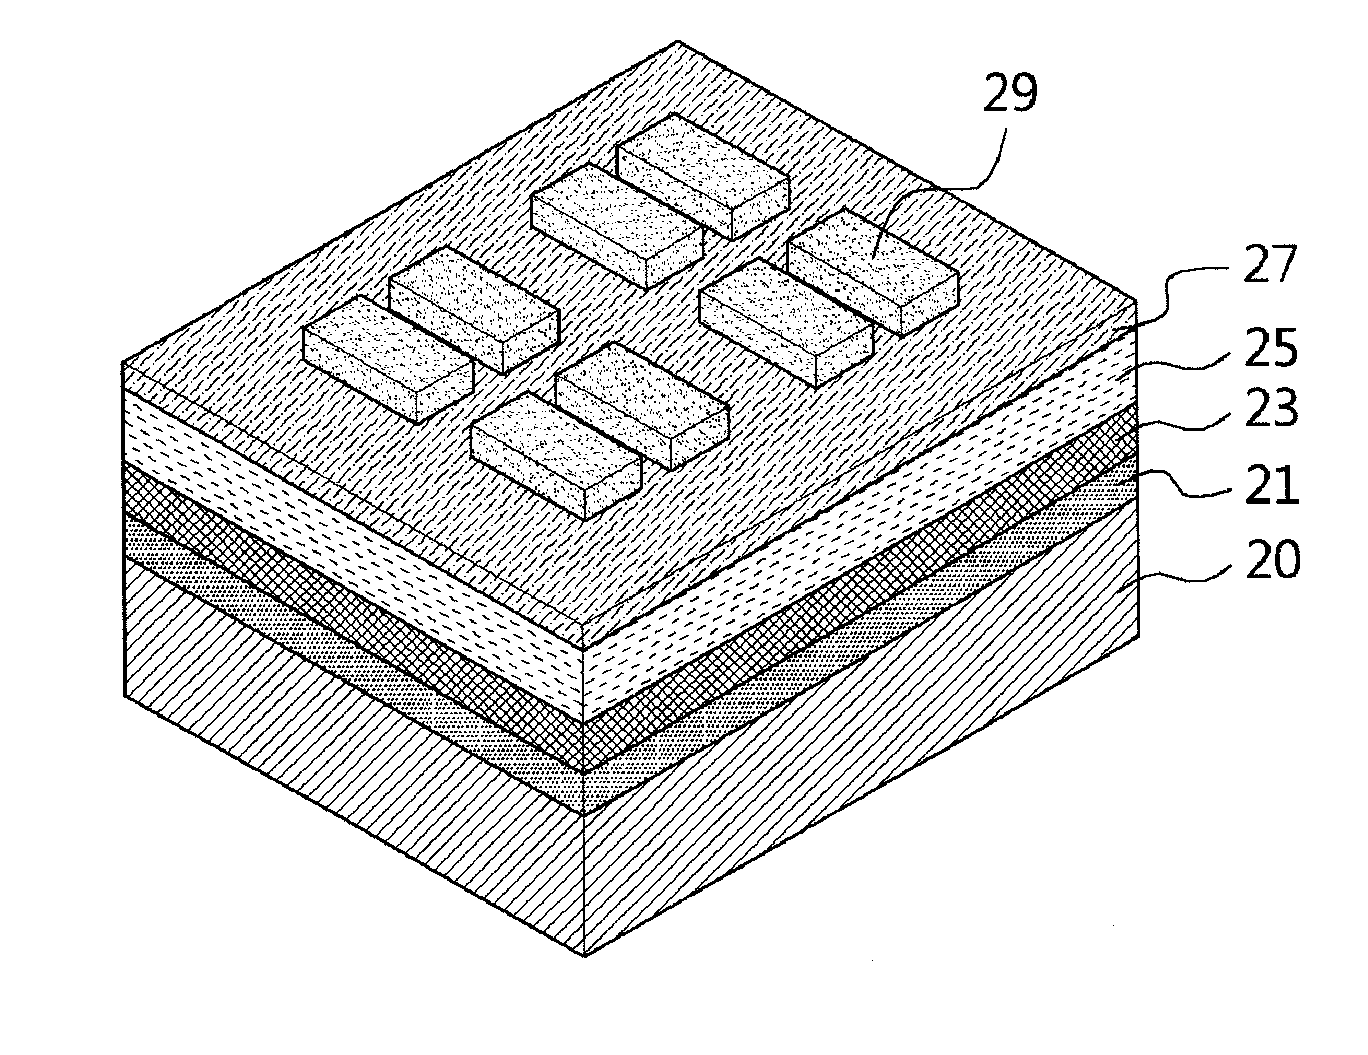 Polymer containing thiophene unit and thienylenevinylene unit, and organic field effect transistor and organic solar cell containing the polymer